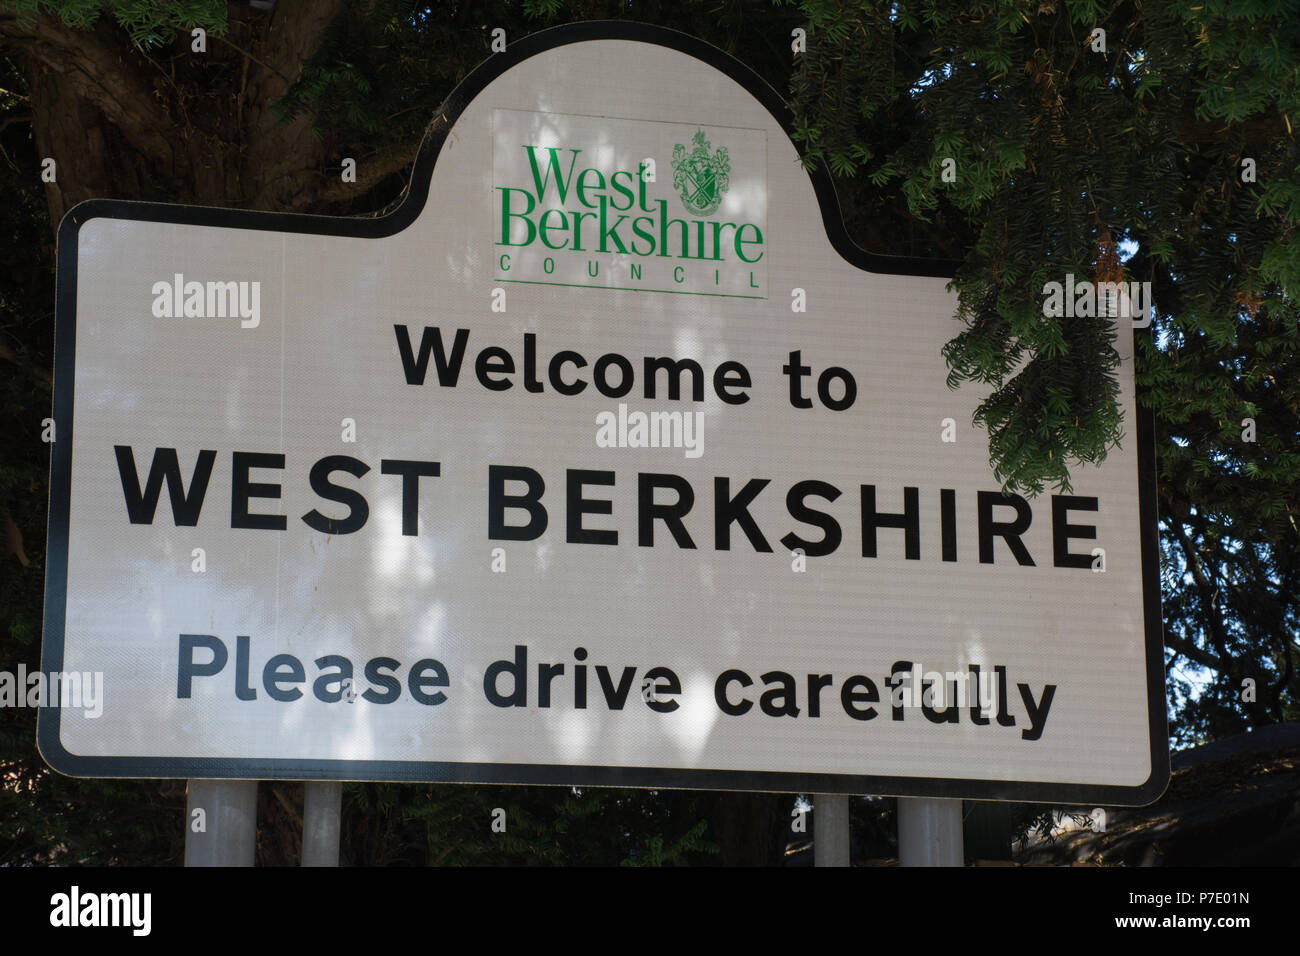 Welcome to West Berkshire road sign, asking people to drive carefully, entering Streatley on road from Goring-on-Thames Stock Photo